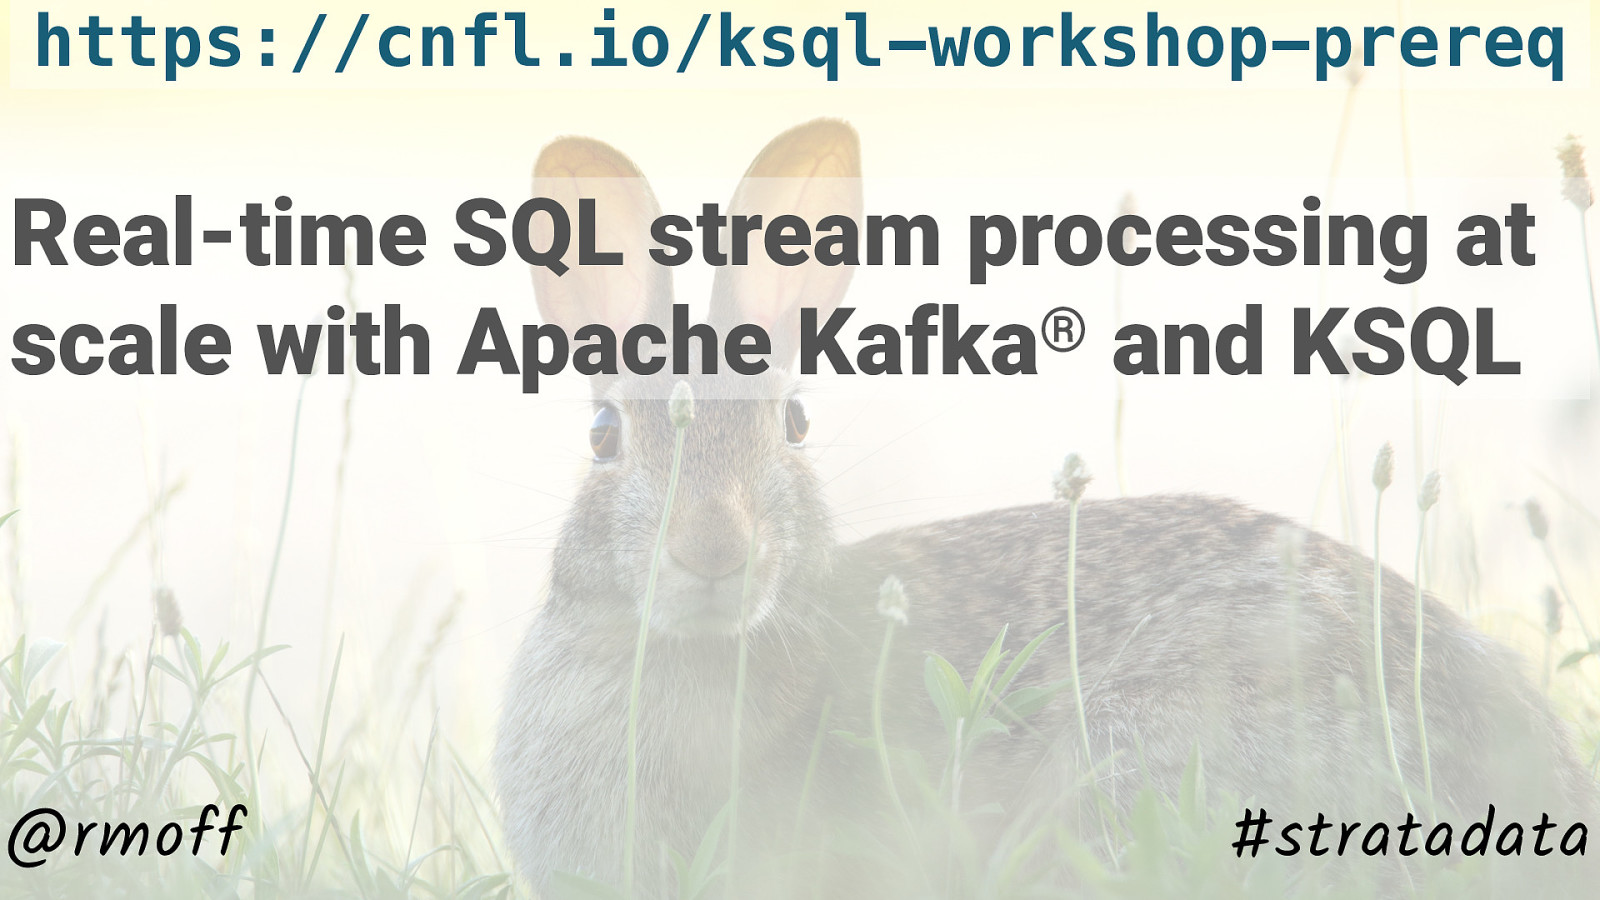 Real-time SQL stream processing at scale with Apache Kafka and KSQL